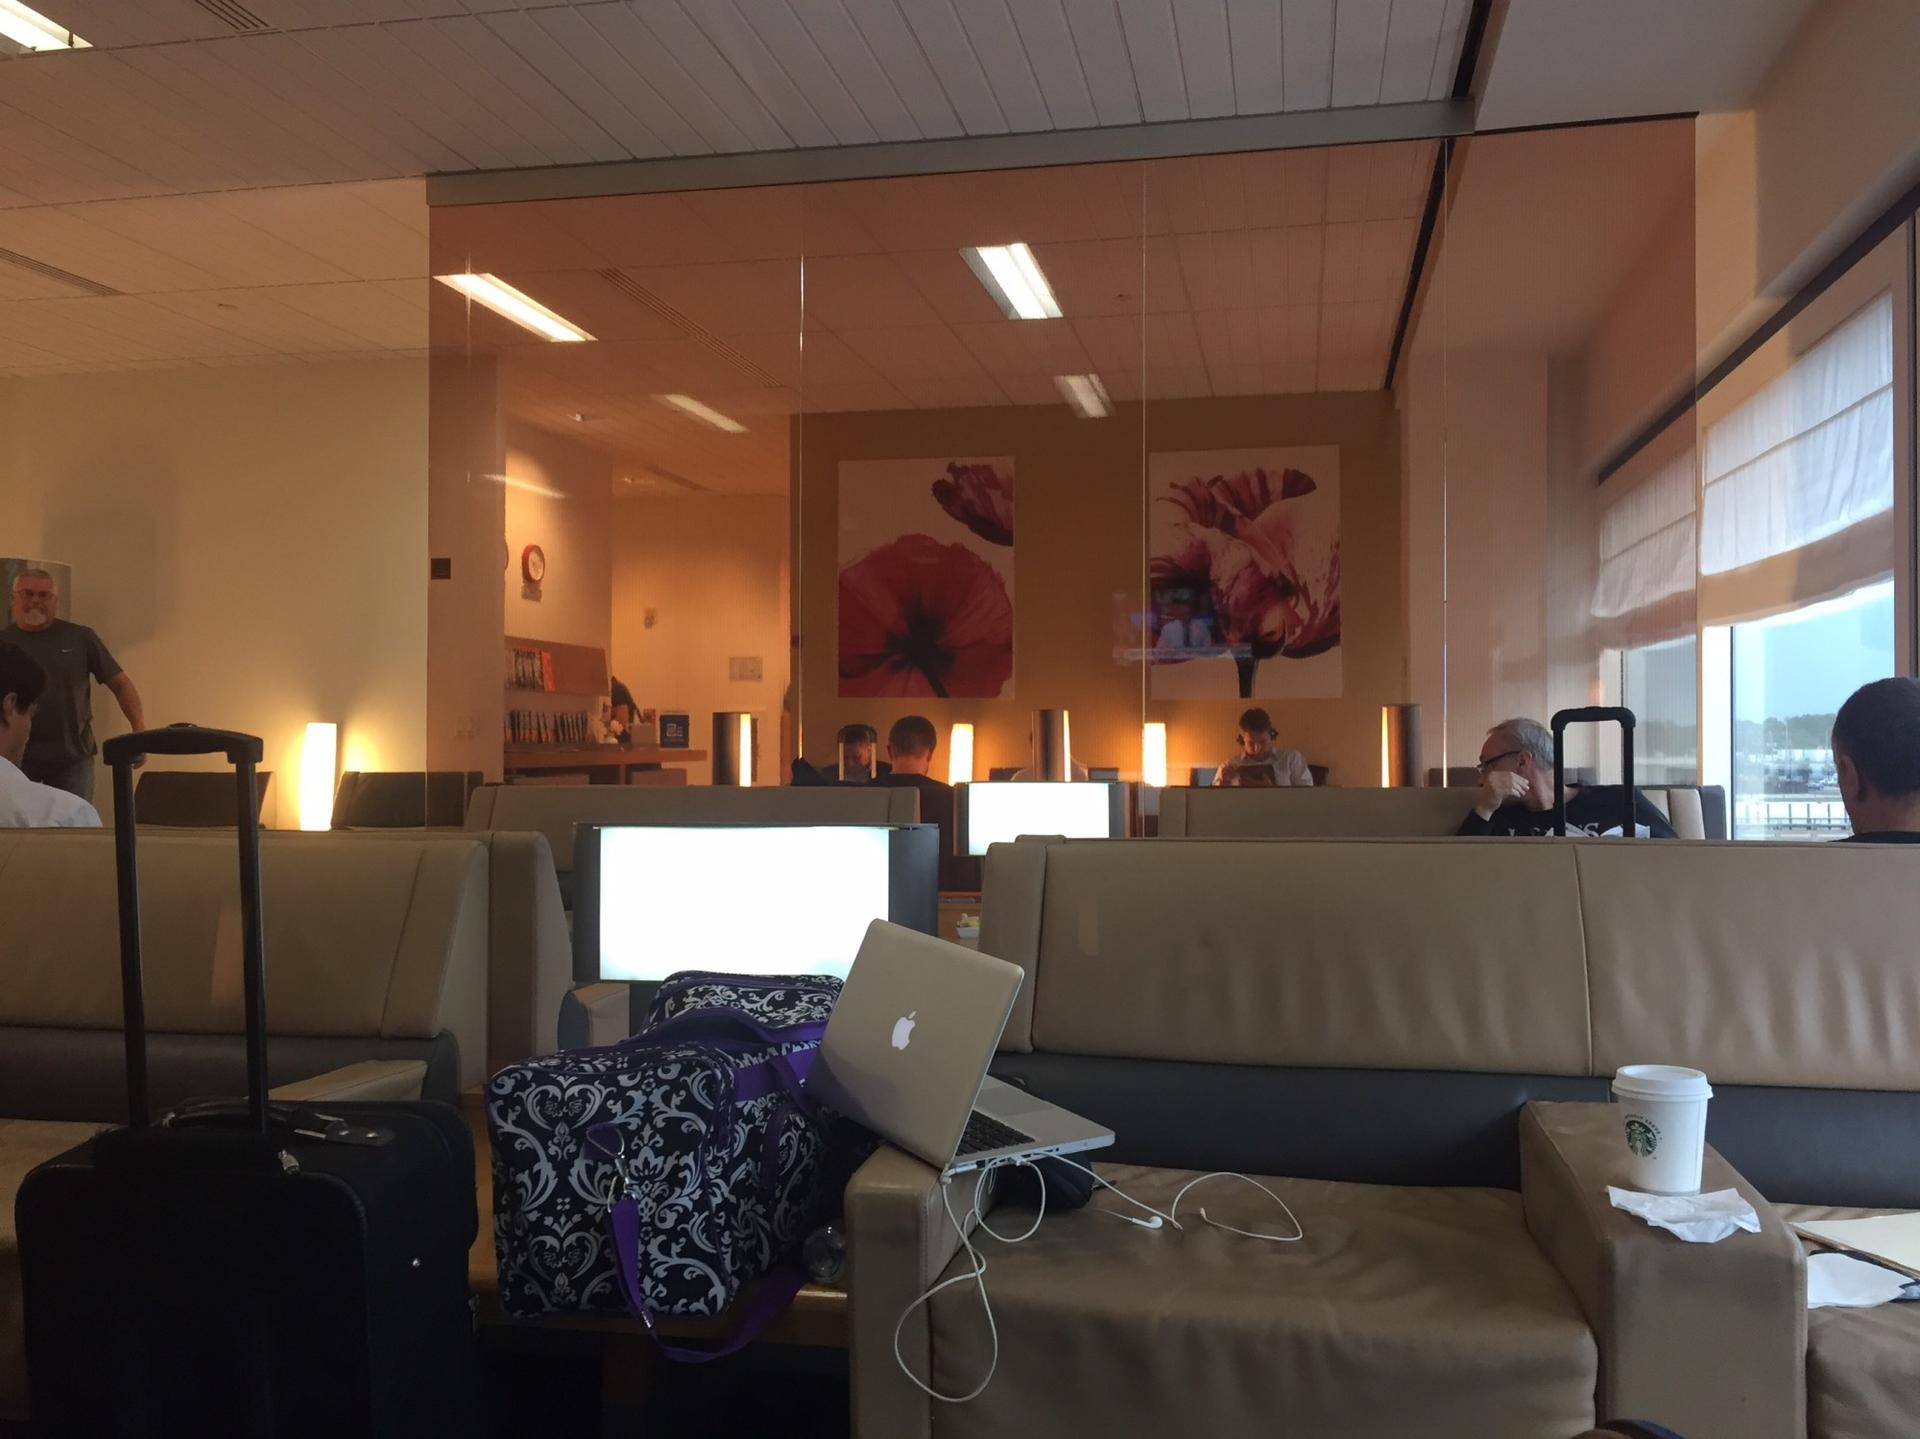 Air France Lounge image 10 of 31